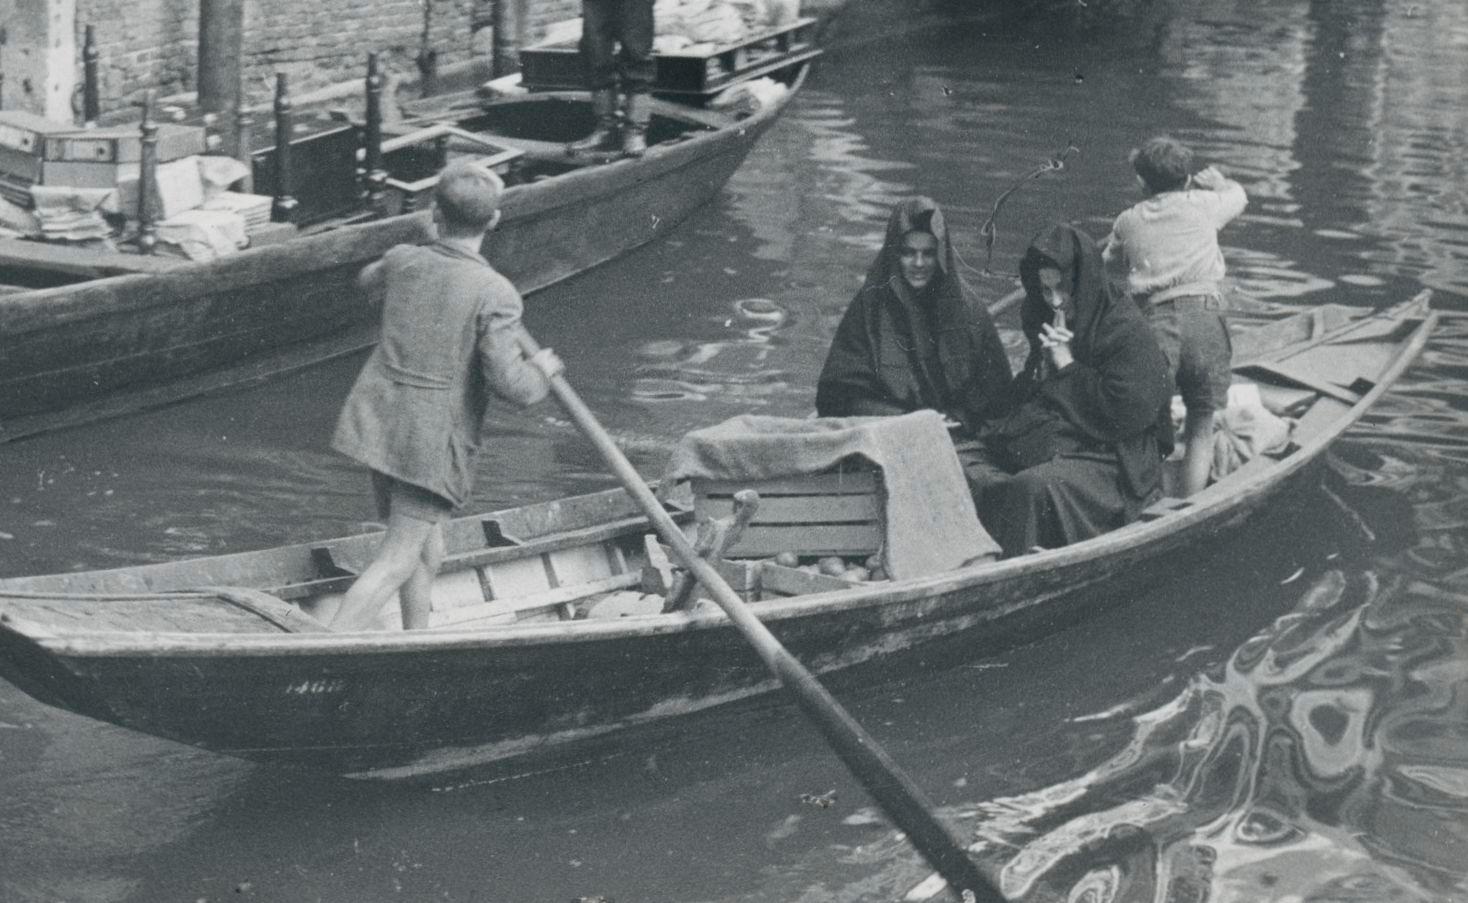 Venice, Venedig, Gondolas, Black and White, Italy 1950s, 12, 9 x 17, 8 cm - Modern Photograph by Erich Andres